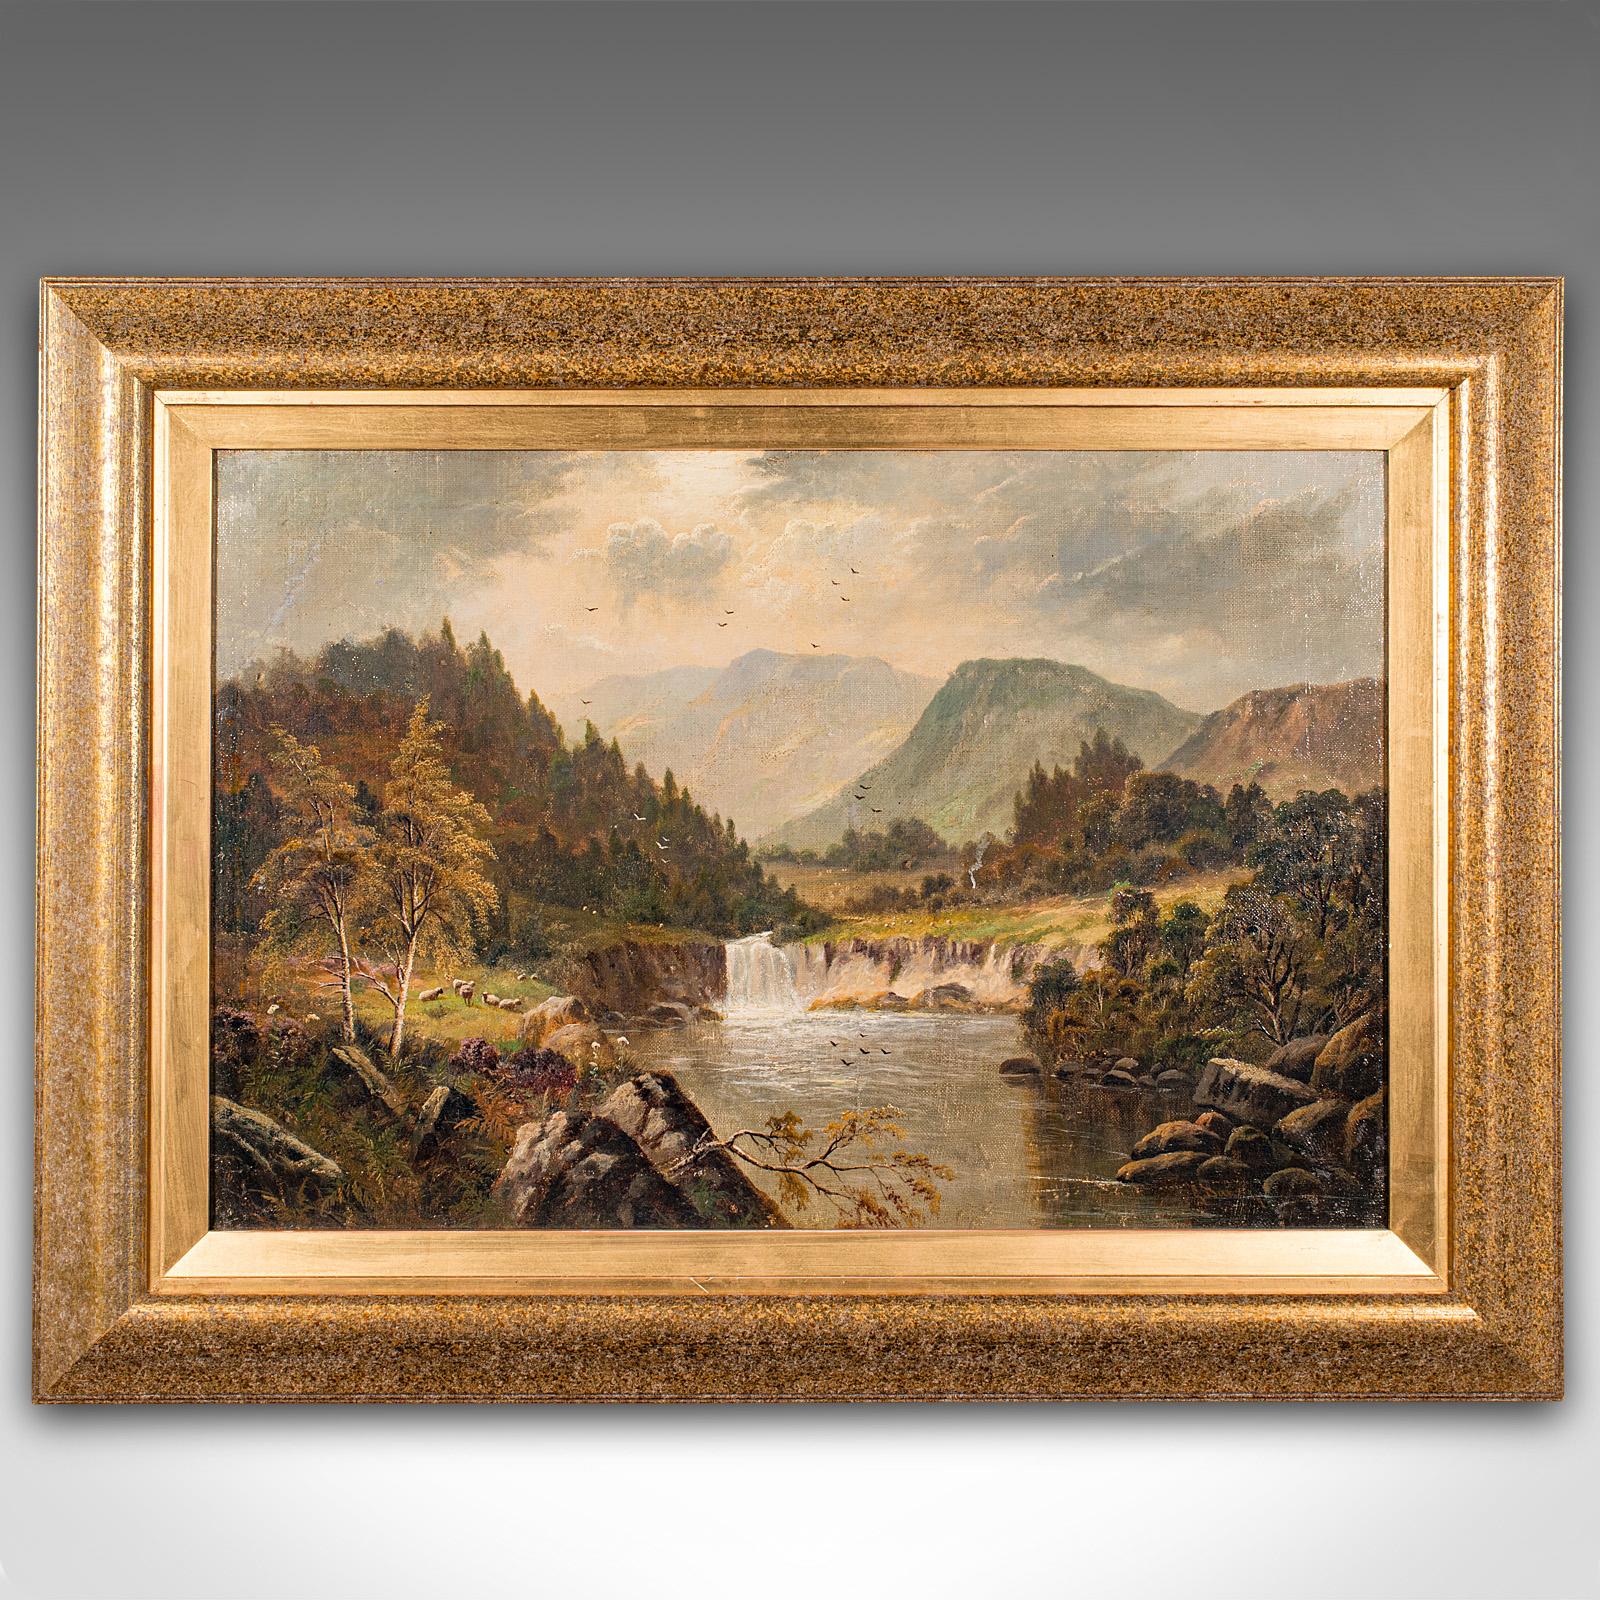 This is an antique landscape painting. A British school, original oil on canvas signed G. Dawson, dating to the late Victorian period, circa 1900.

Signed G Dawson, this fine landscape in oil is undoubtedly of the British School, with examples of